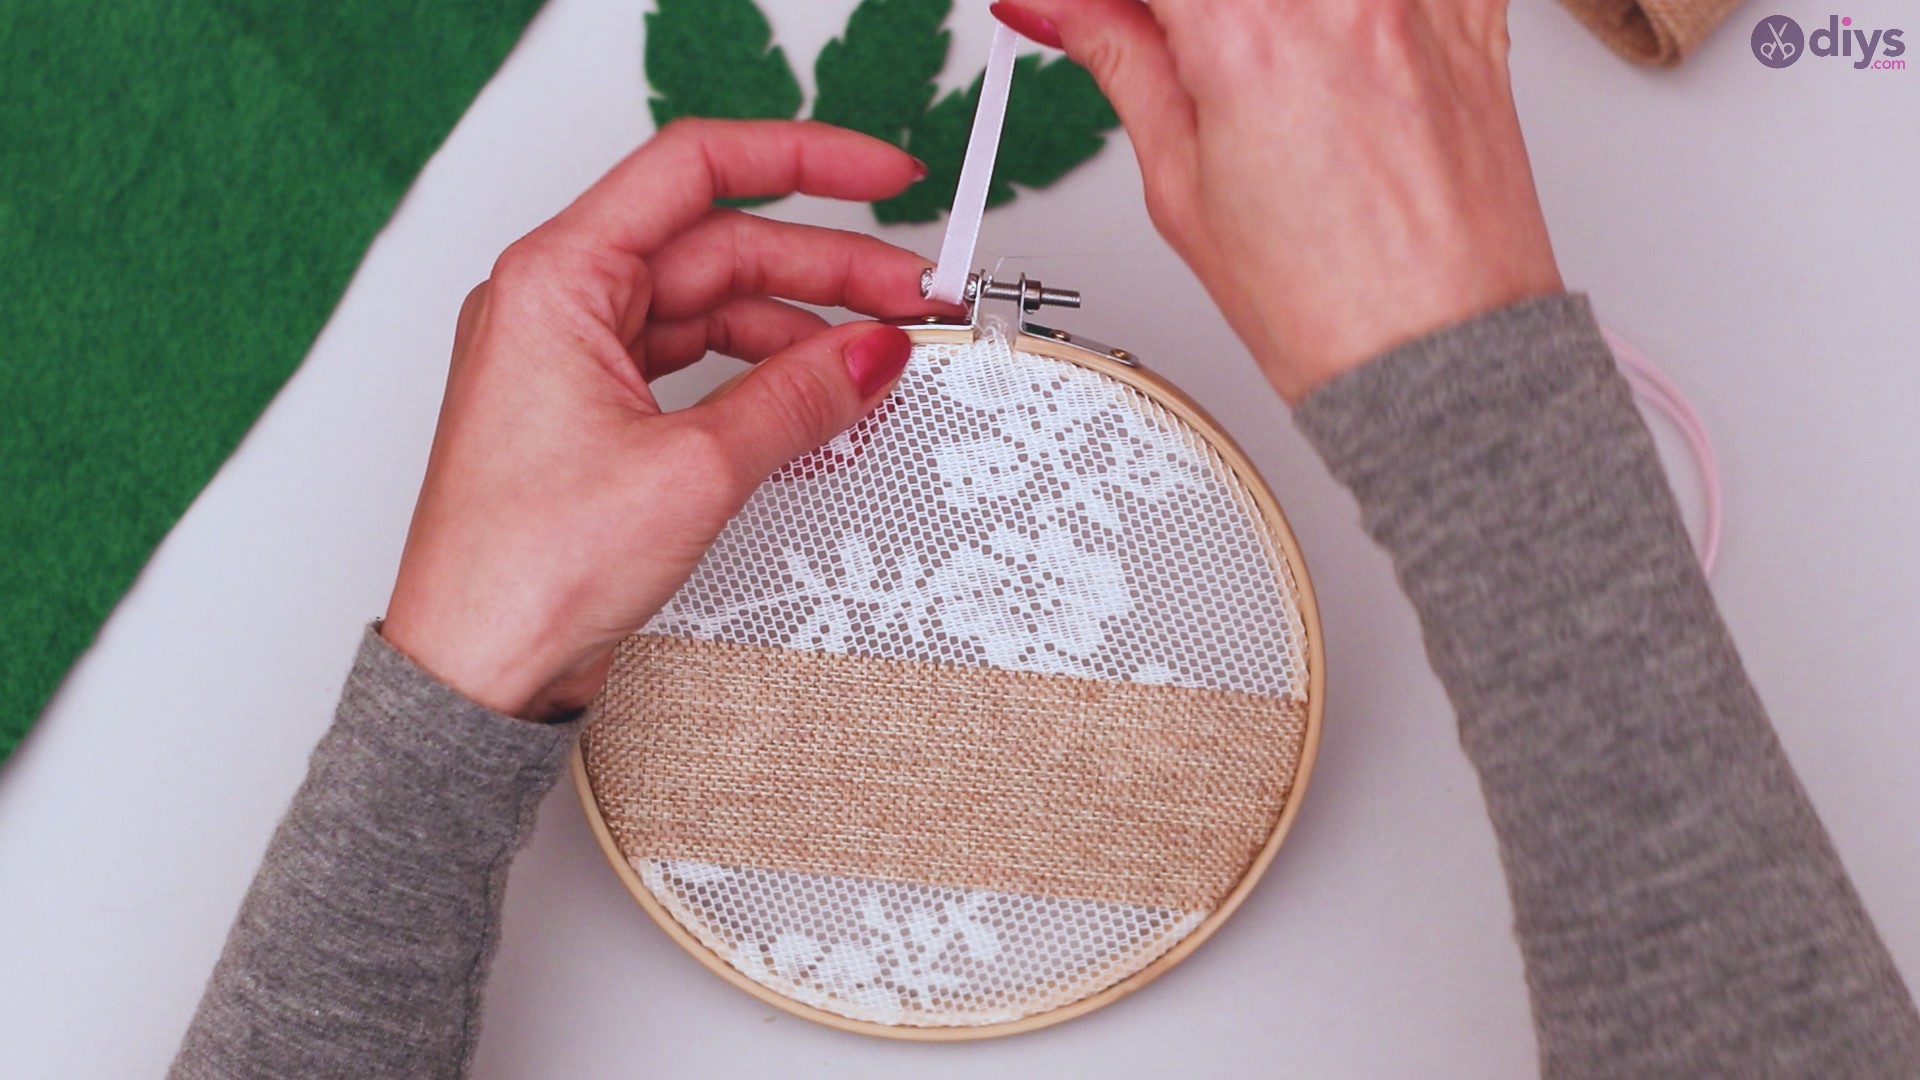 Diy embroidery hoop wall decor tutorial step by step (54)